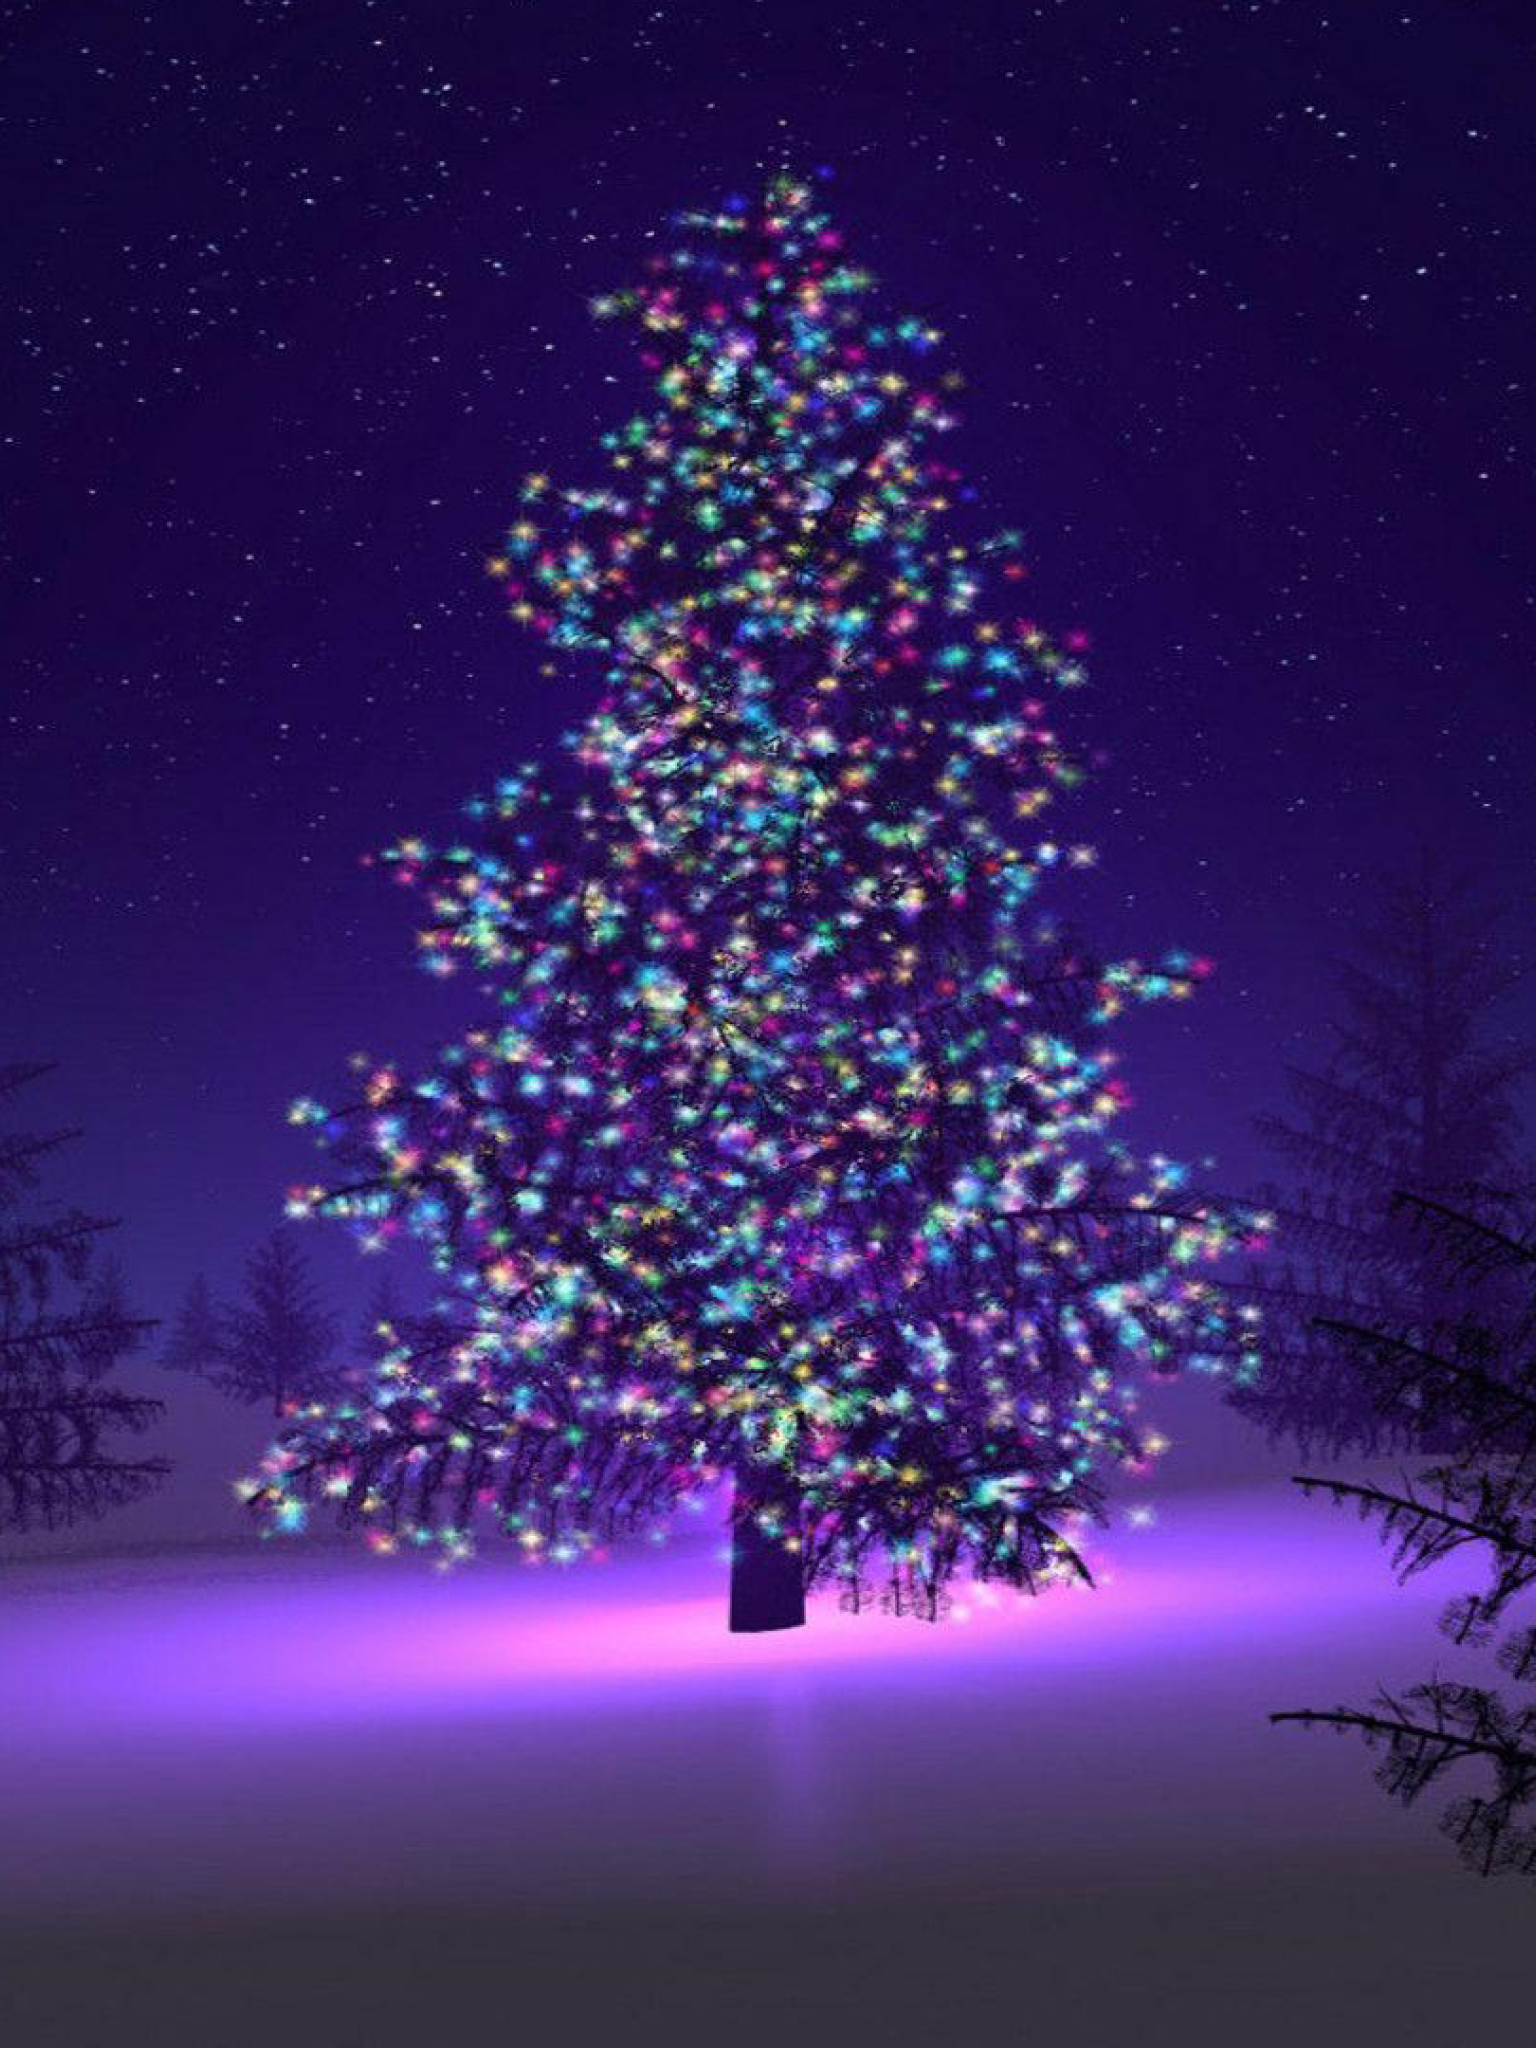 1536x2048 Resolution Christmas Tree with Light Decorations 1536x2048 ...